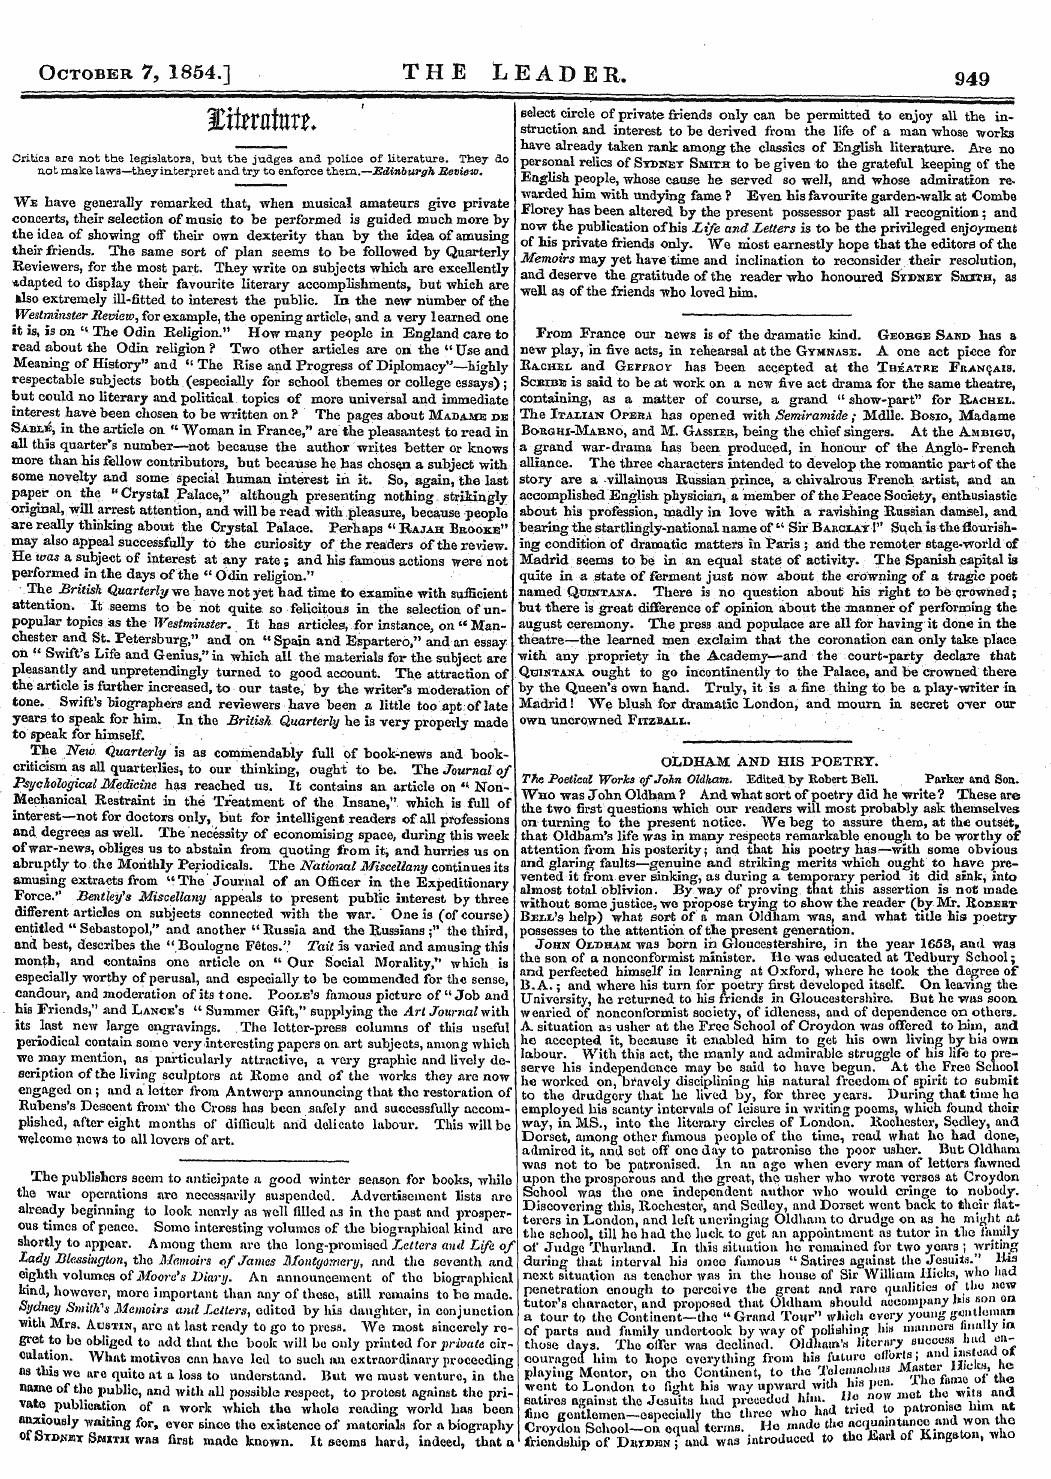 Leader (1850-1860): jS F Y, Country edition - October 7, 1854.] The Leader. 949